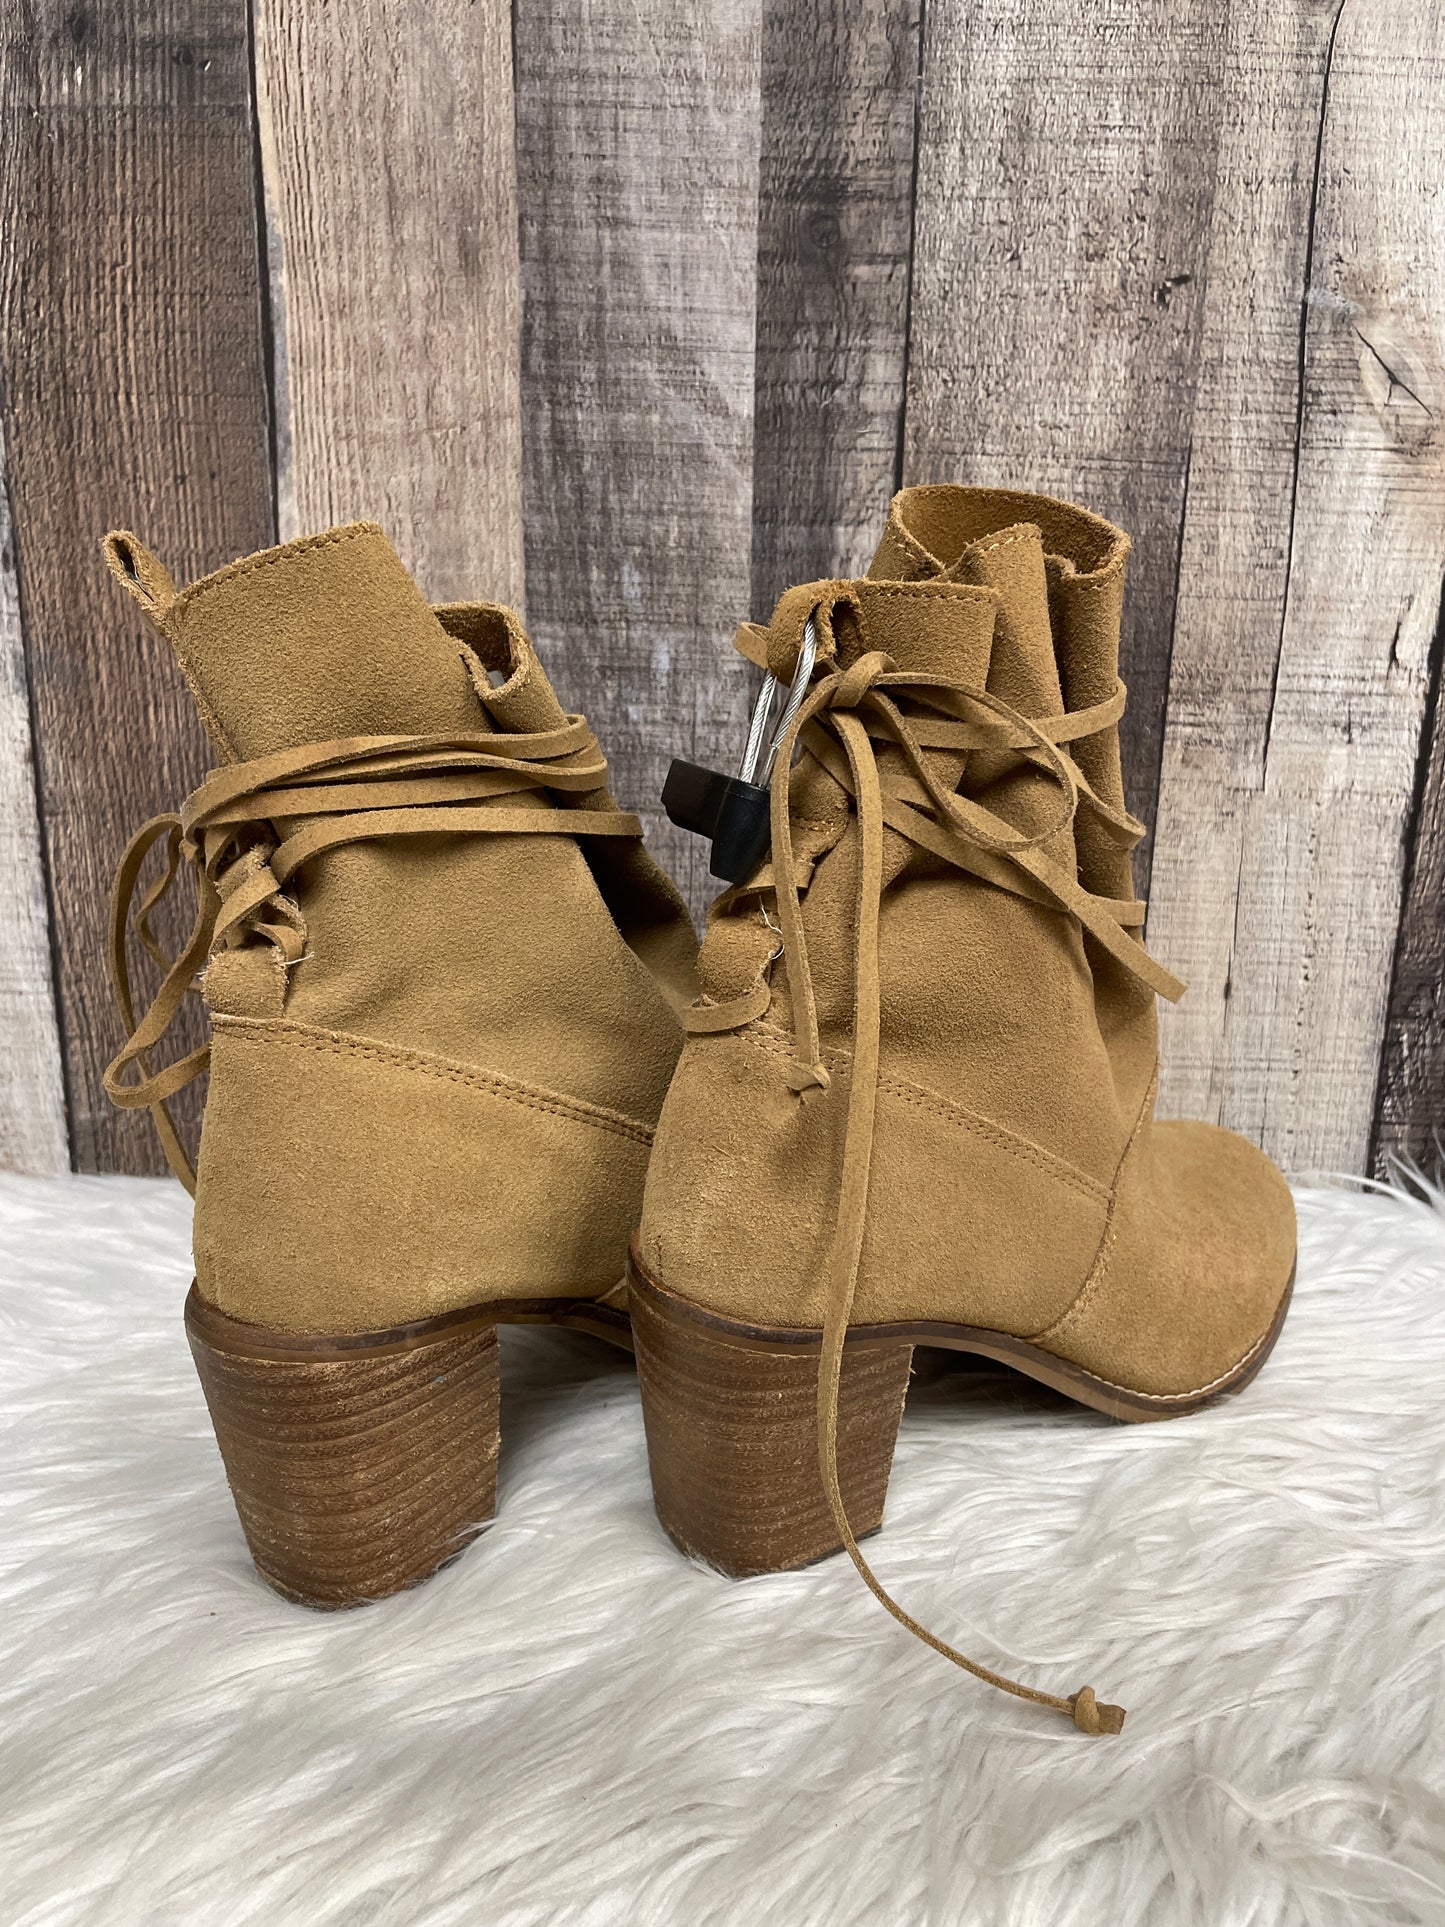 Boots Ankle Heels By Toms  Size: 8.5